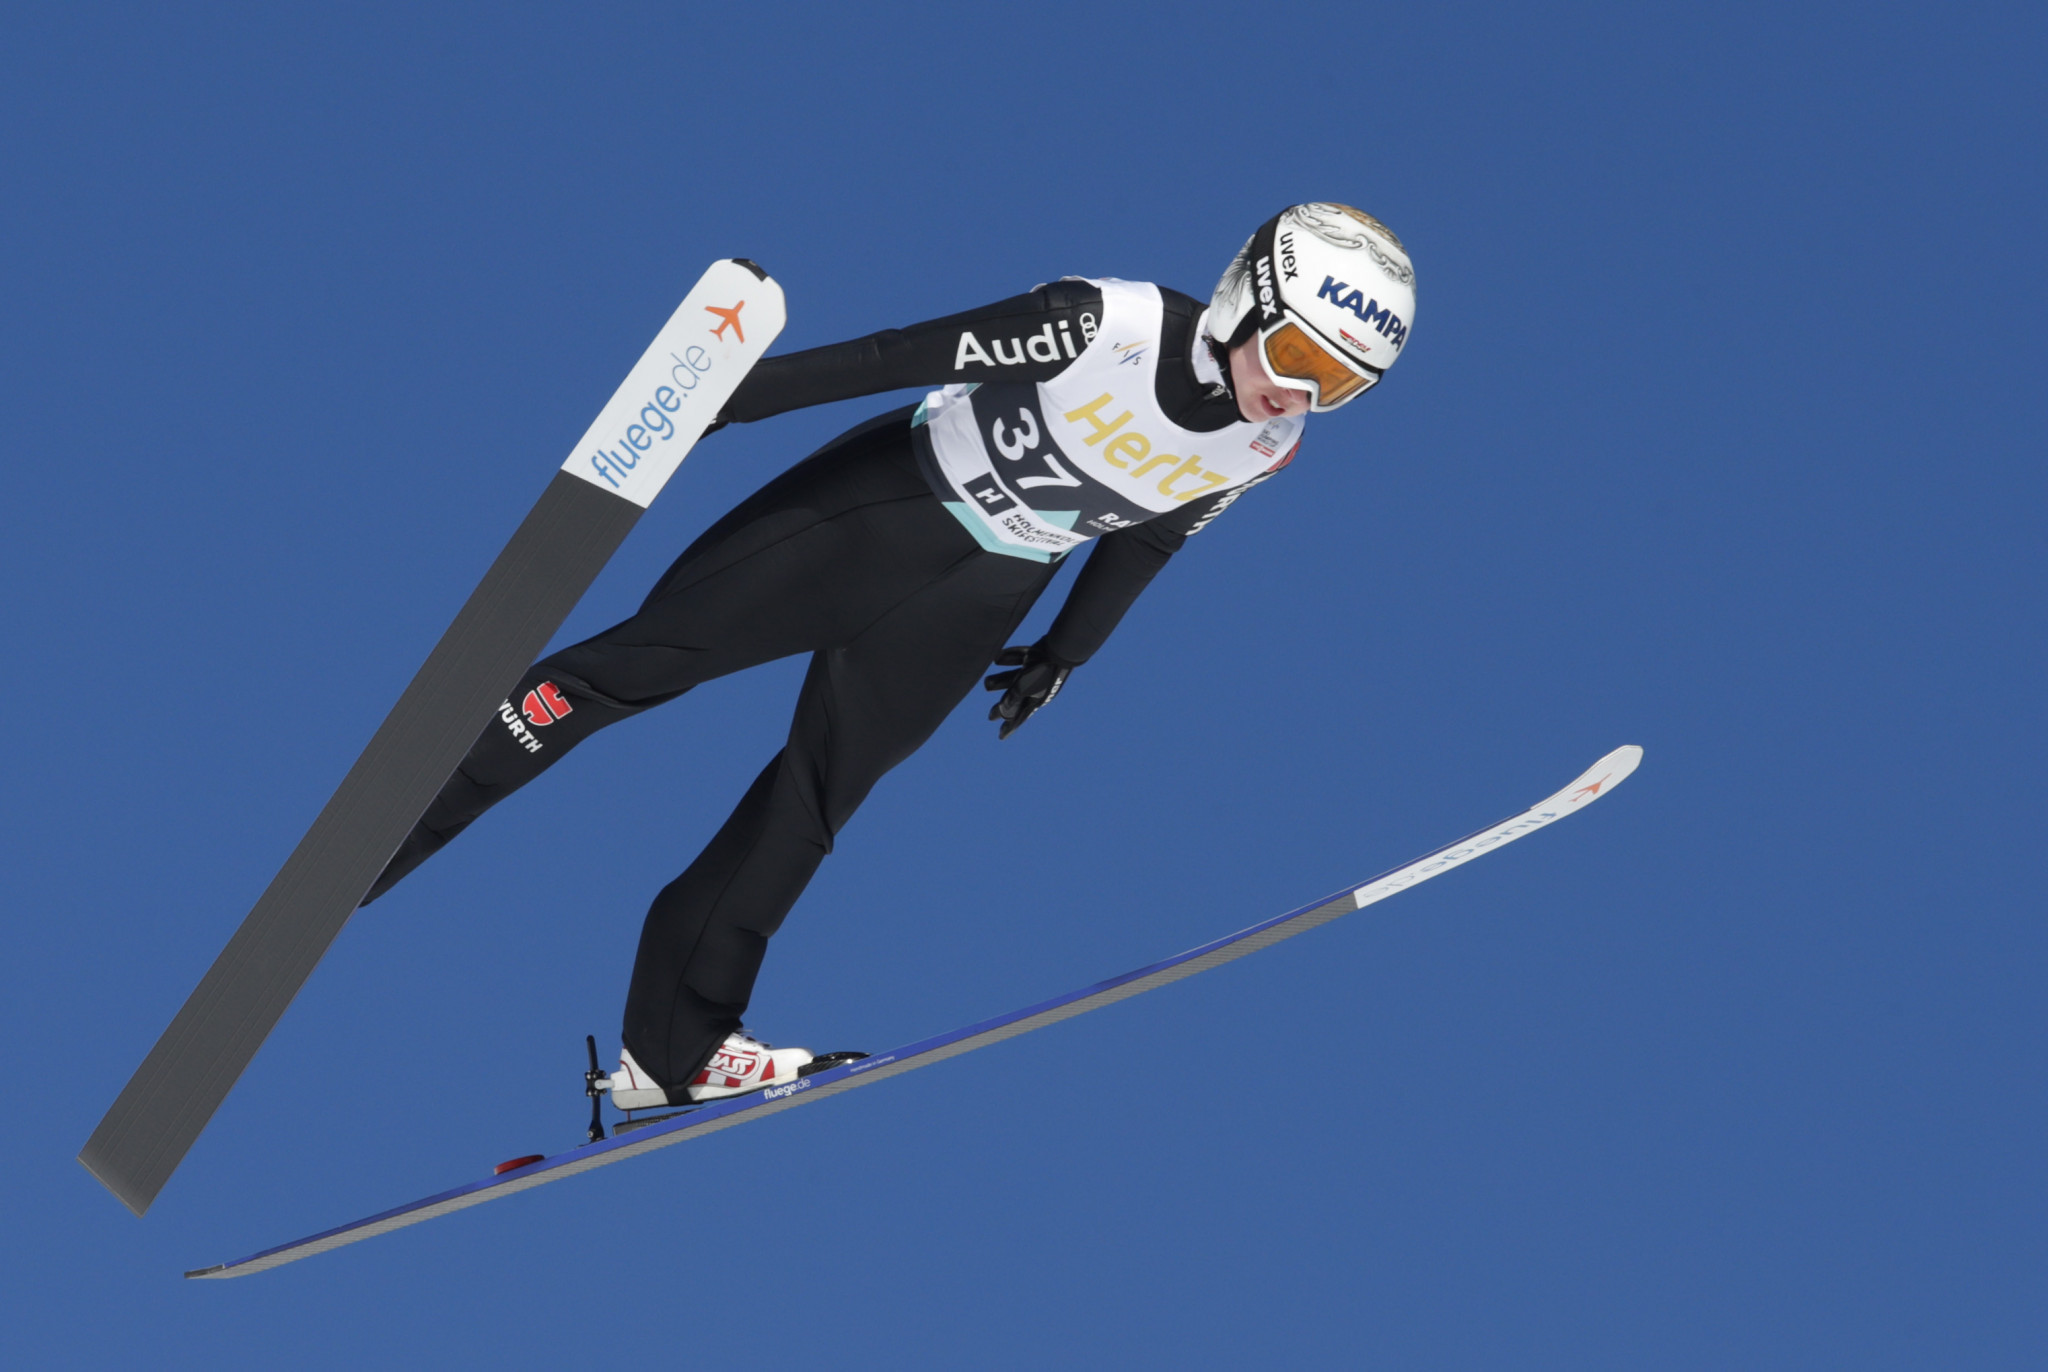 Seyfarth secures second successive win at FIS Ski Jumping World Cup event in Nizhny Tagil